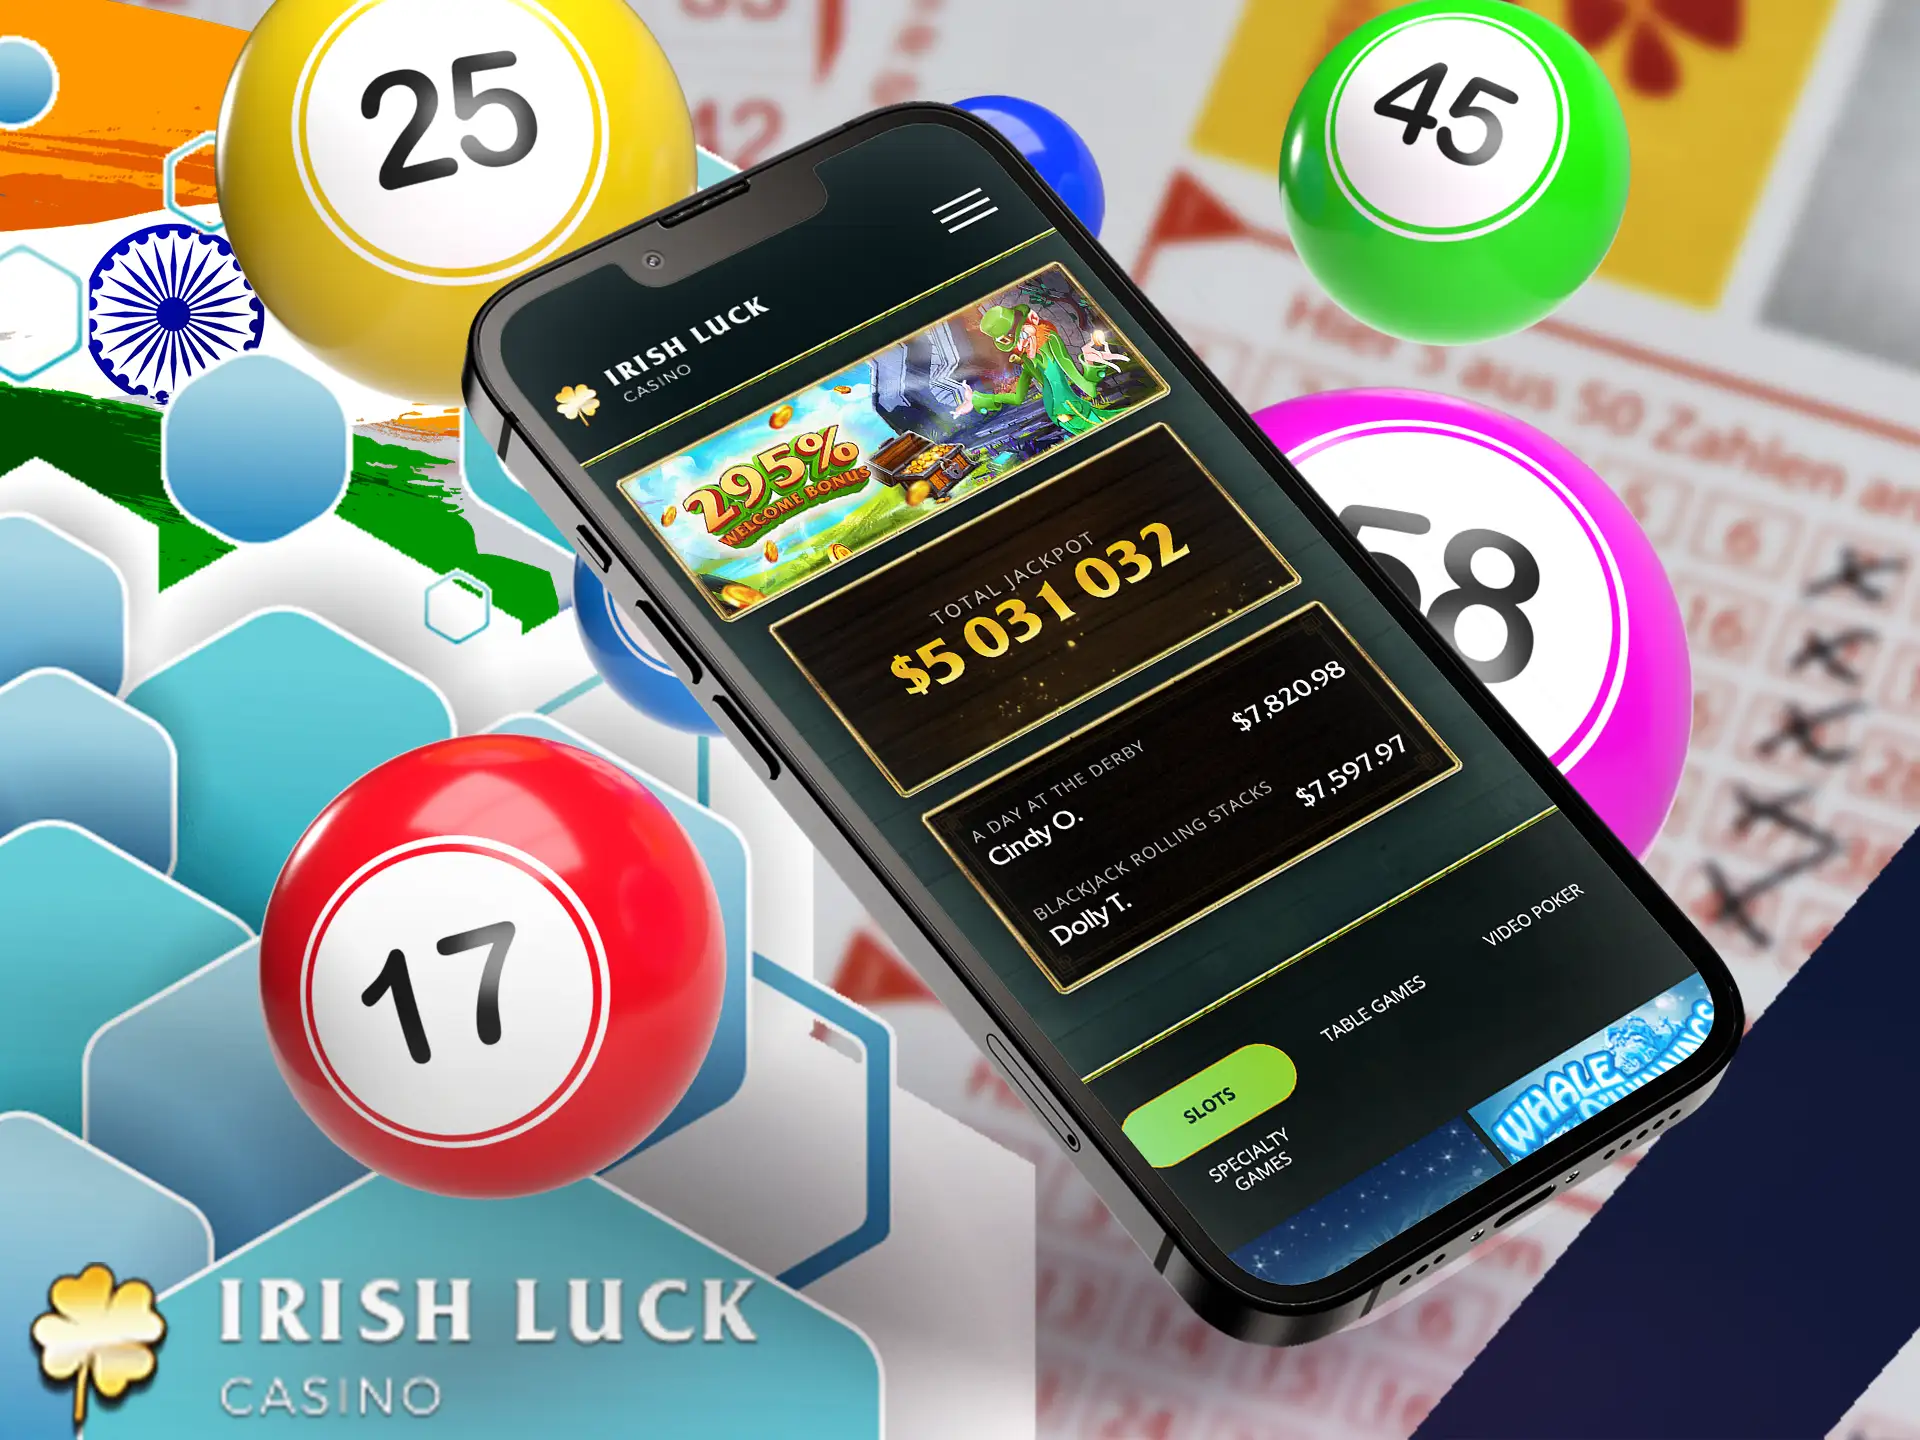 If you are tired of classic games - this section will help you to unwind, get new sensations from playing Irish Luck.